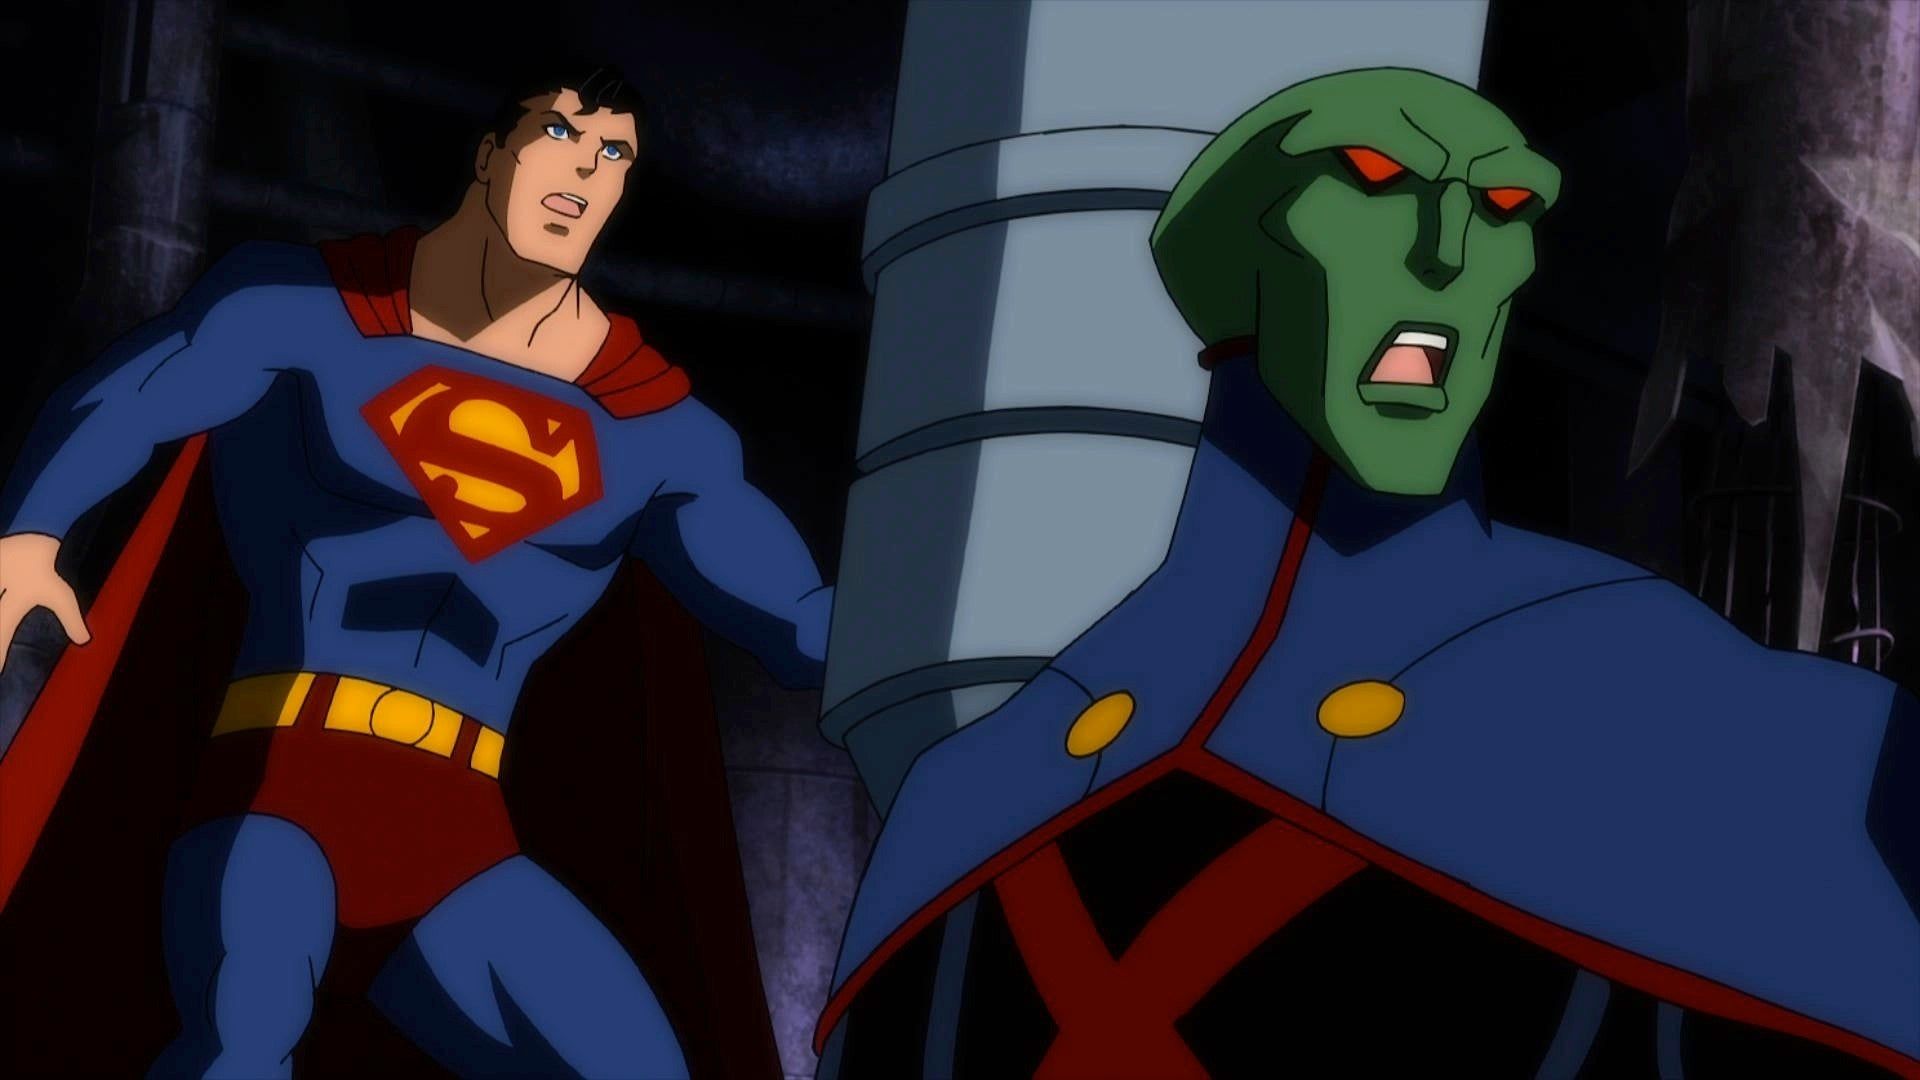 Tim Daly reprises role of Superman for Justice League: Doom